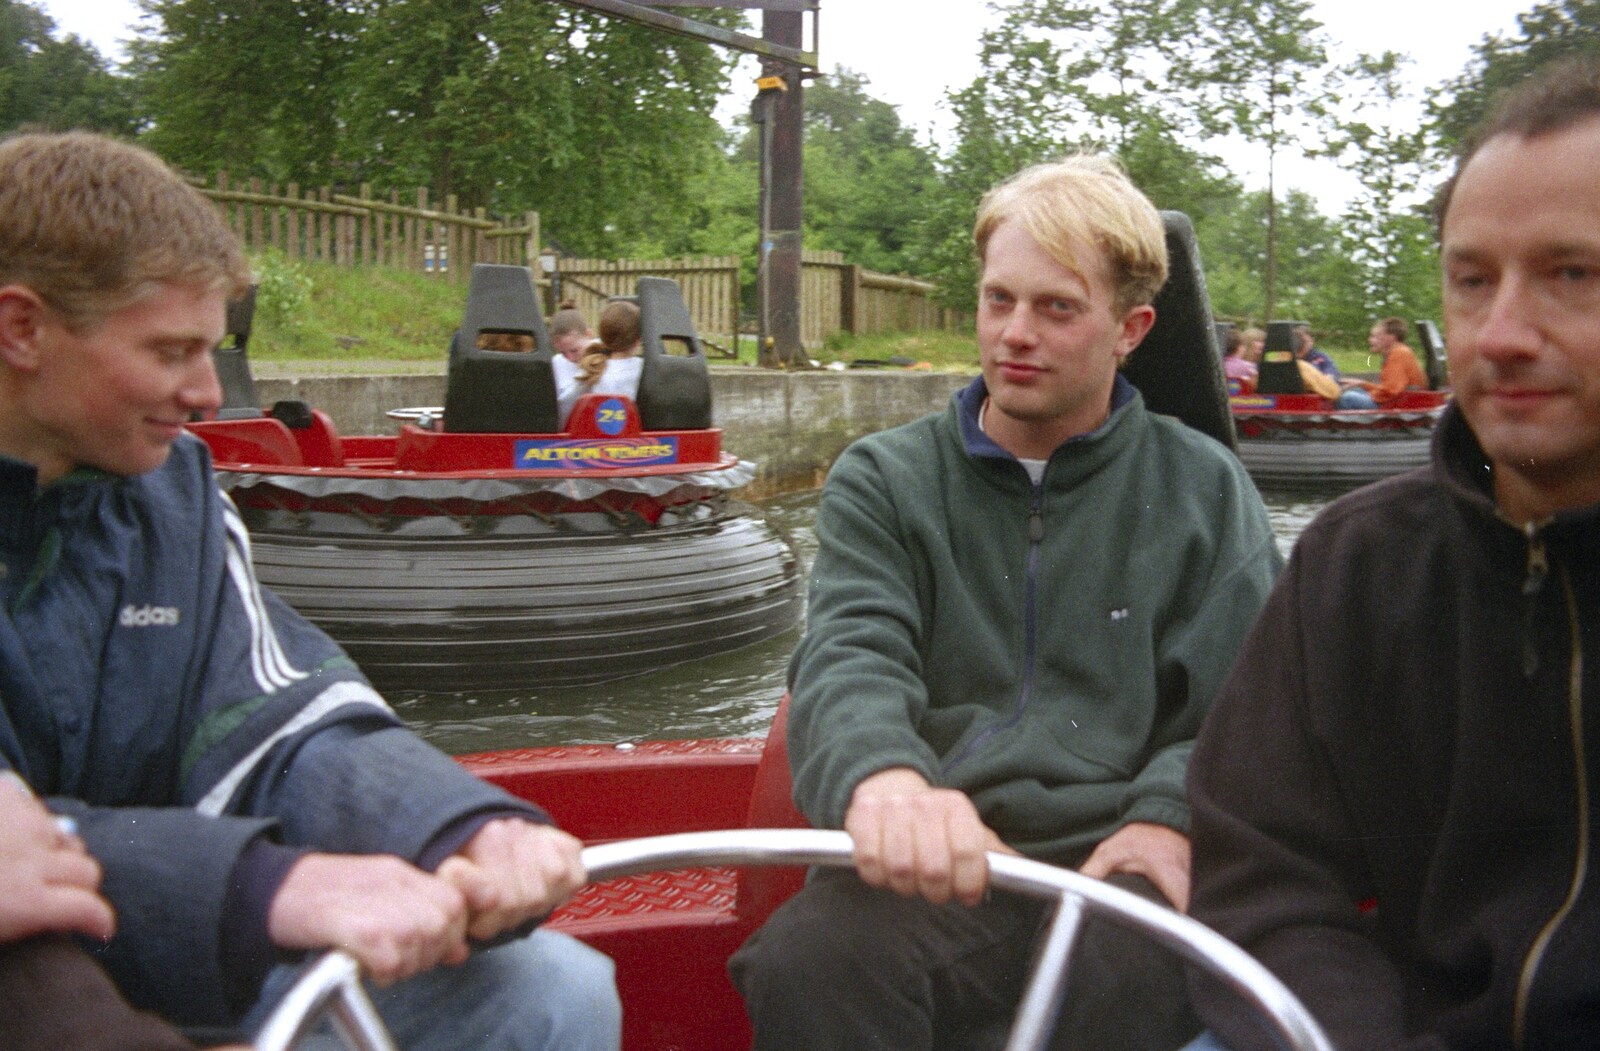 A Trip to Alton Towers, Staffordshire - 15th June 2000: The Boy Phil, Paul and DH hang on